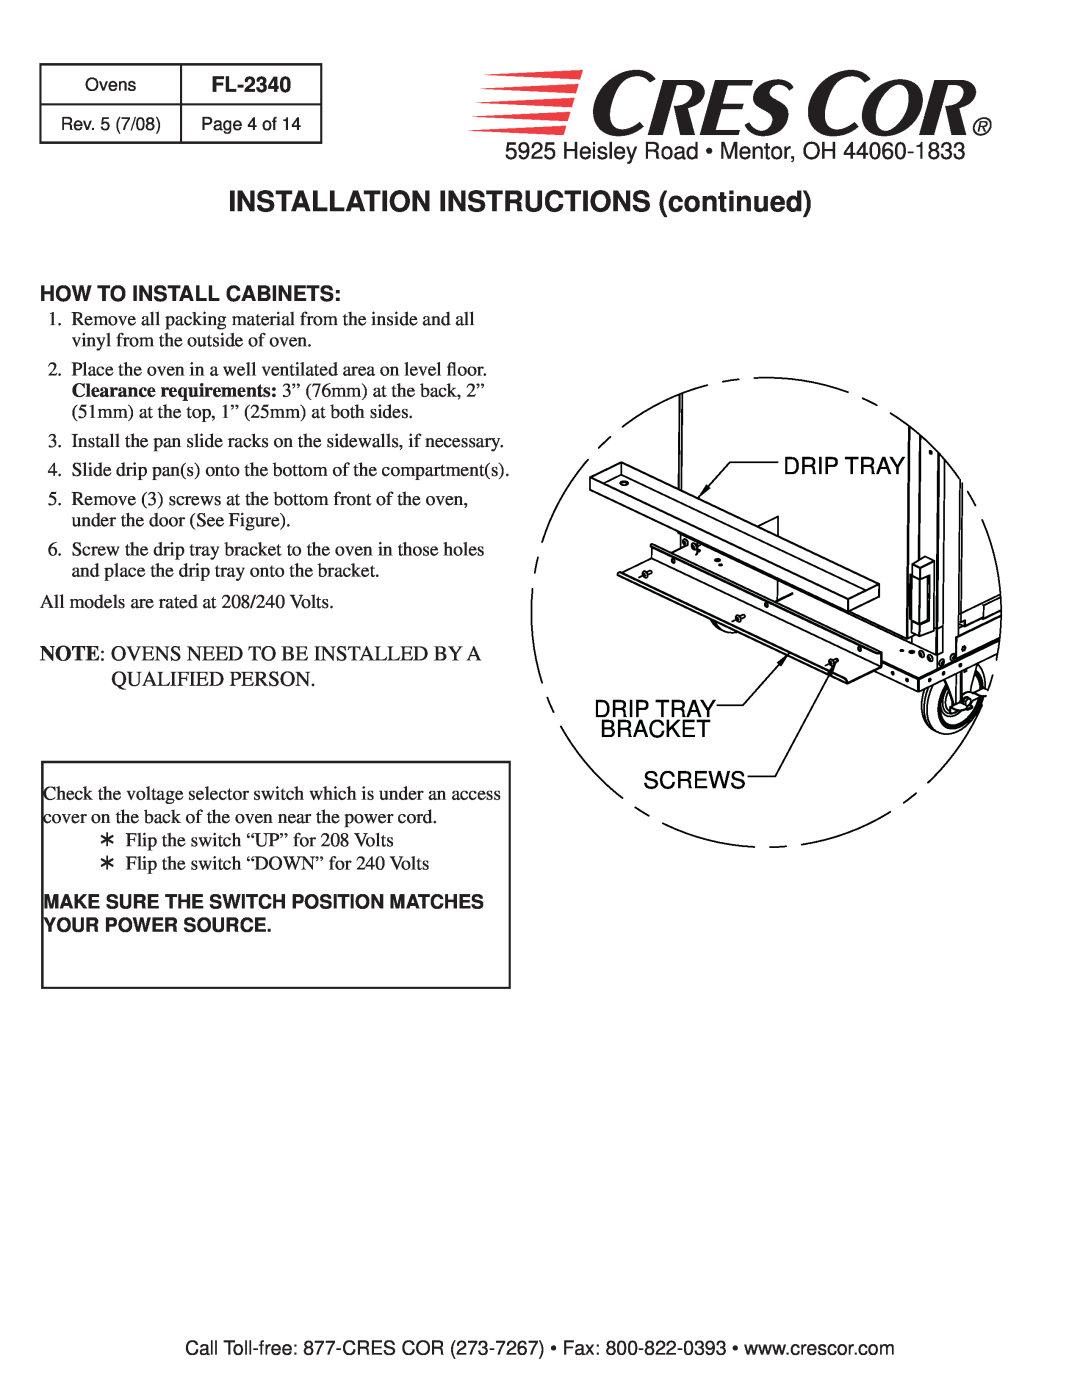 Cres Cor 1000-CH-AL-SPLIT INSTALLATION INSTRUCTIONS continued, How To Install Cabinets, Drip Tray Drip Tray Bracket Screws 